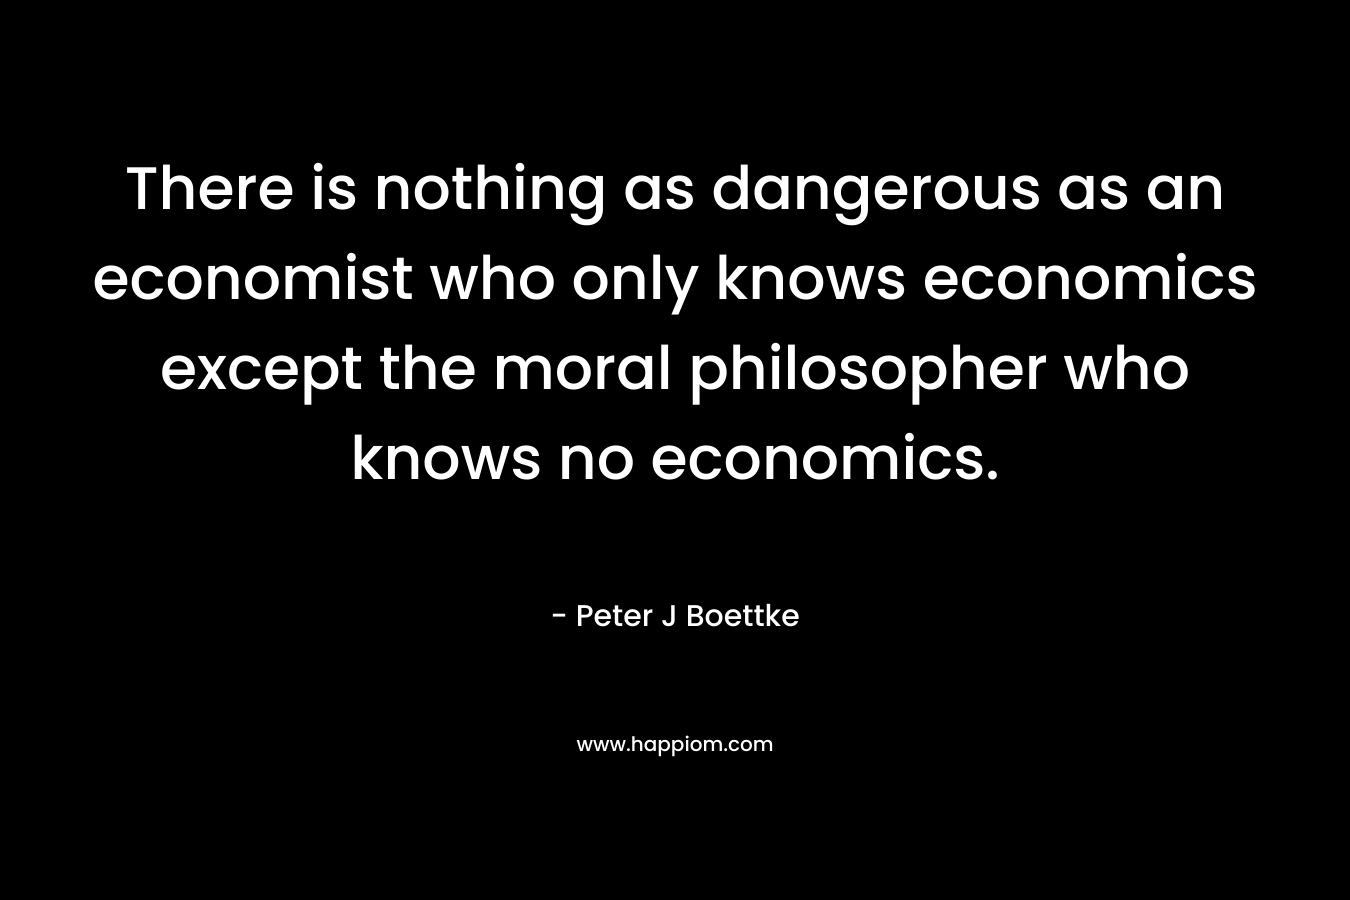 There is nothing as dangerous as an economist who only knows economics except the moral philosopher who knows no economics. – Peter J Boettke